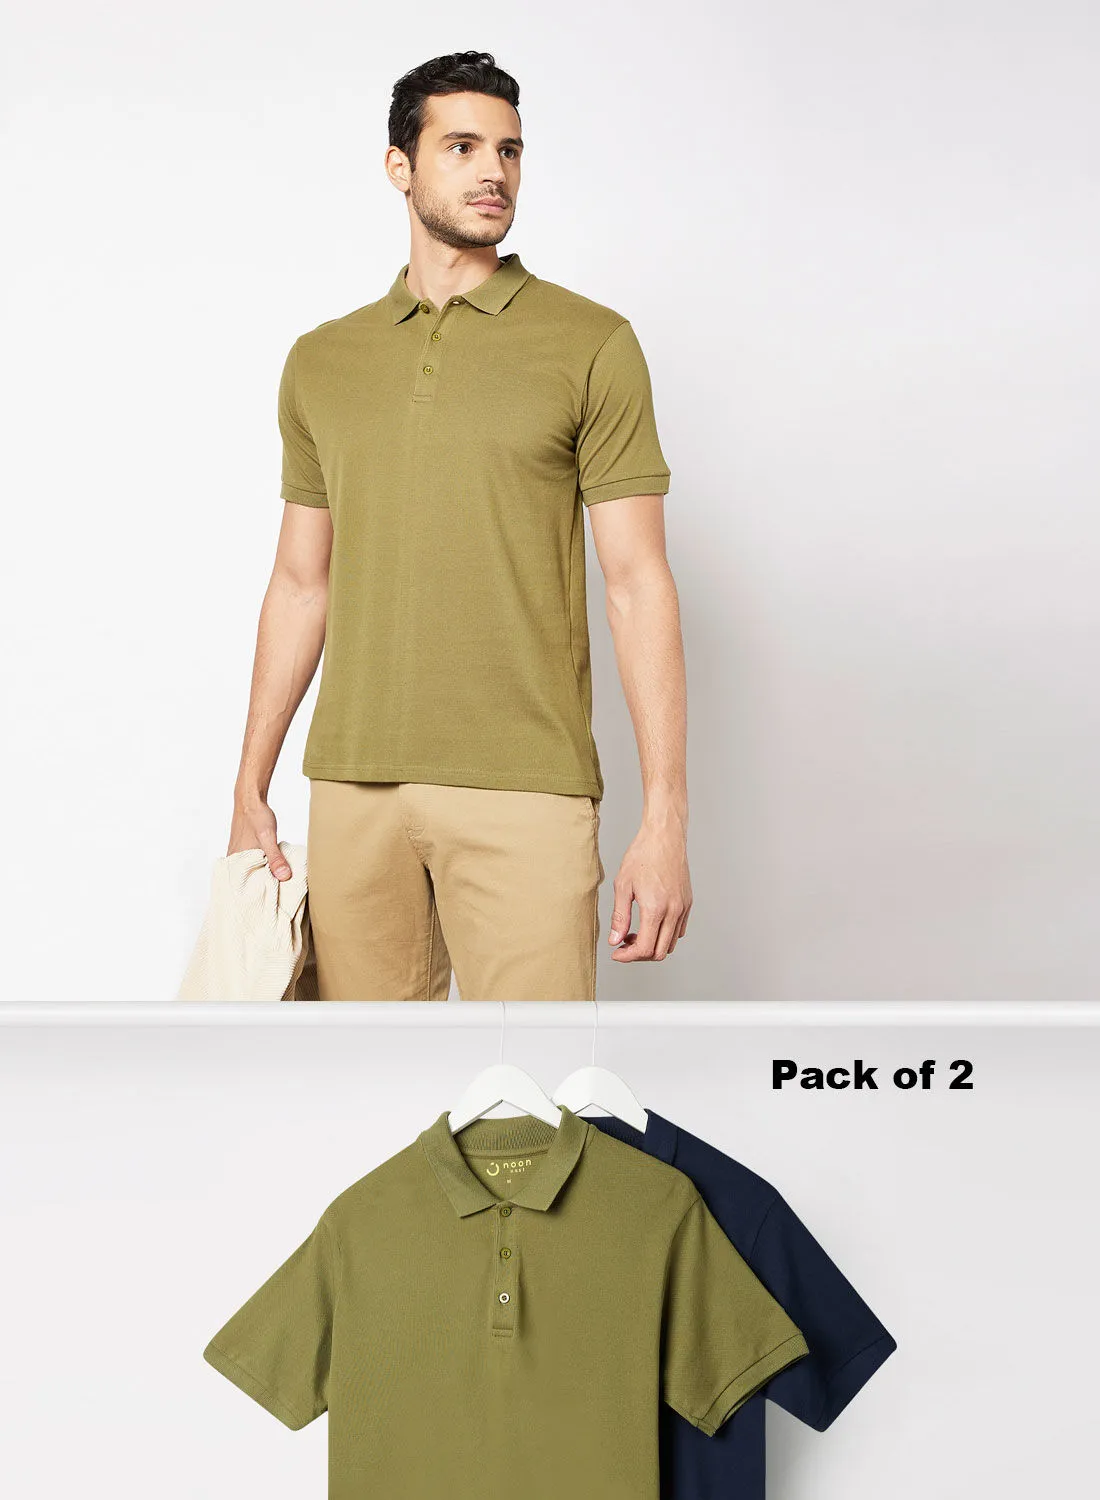 Noon East Pack Of 2 Men's Basic Casual Polo Neck Cotton Comfort Fit Half Sleeve T-Shirt Olive/Dark Navy